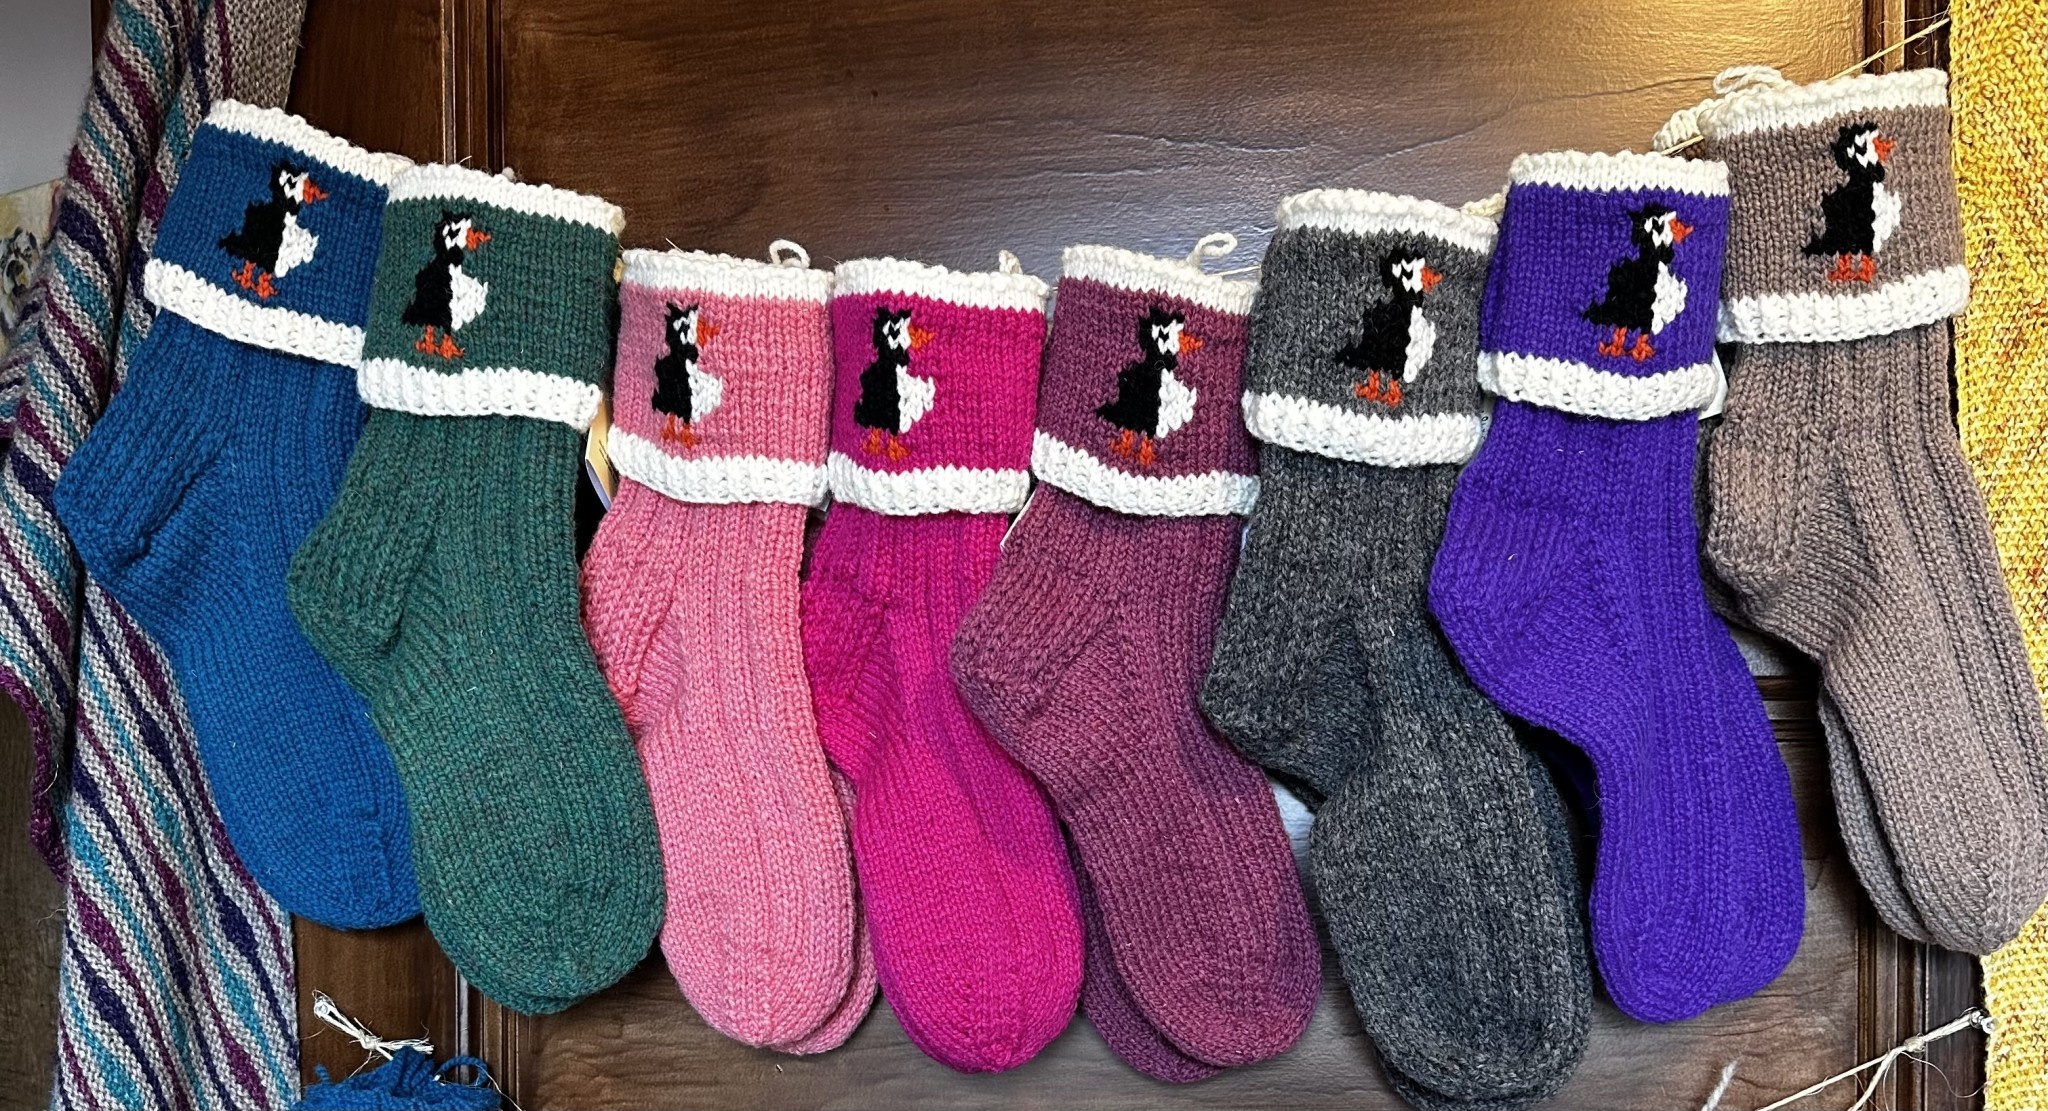 Marie’s Knits (Green Puffin Socks)